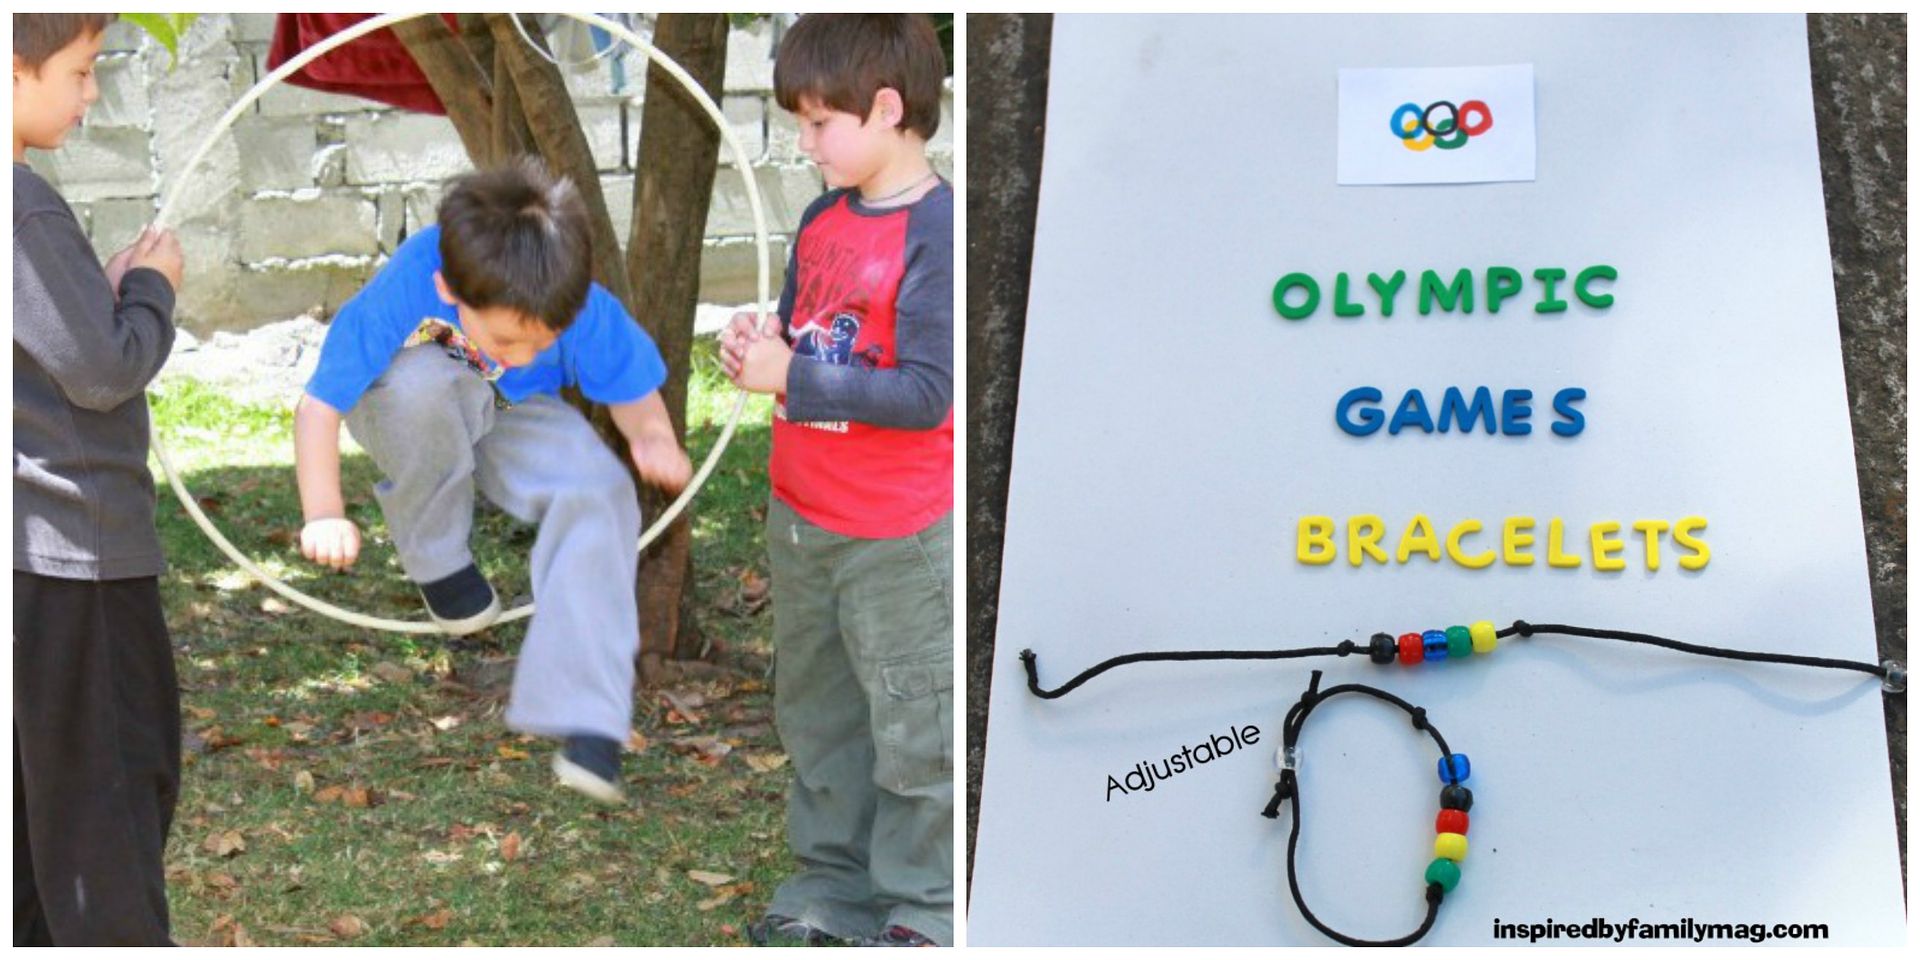 Love the creativity with the outdoor Olympic games and the sportsmanship bracelets at Inspired By Family Mag